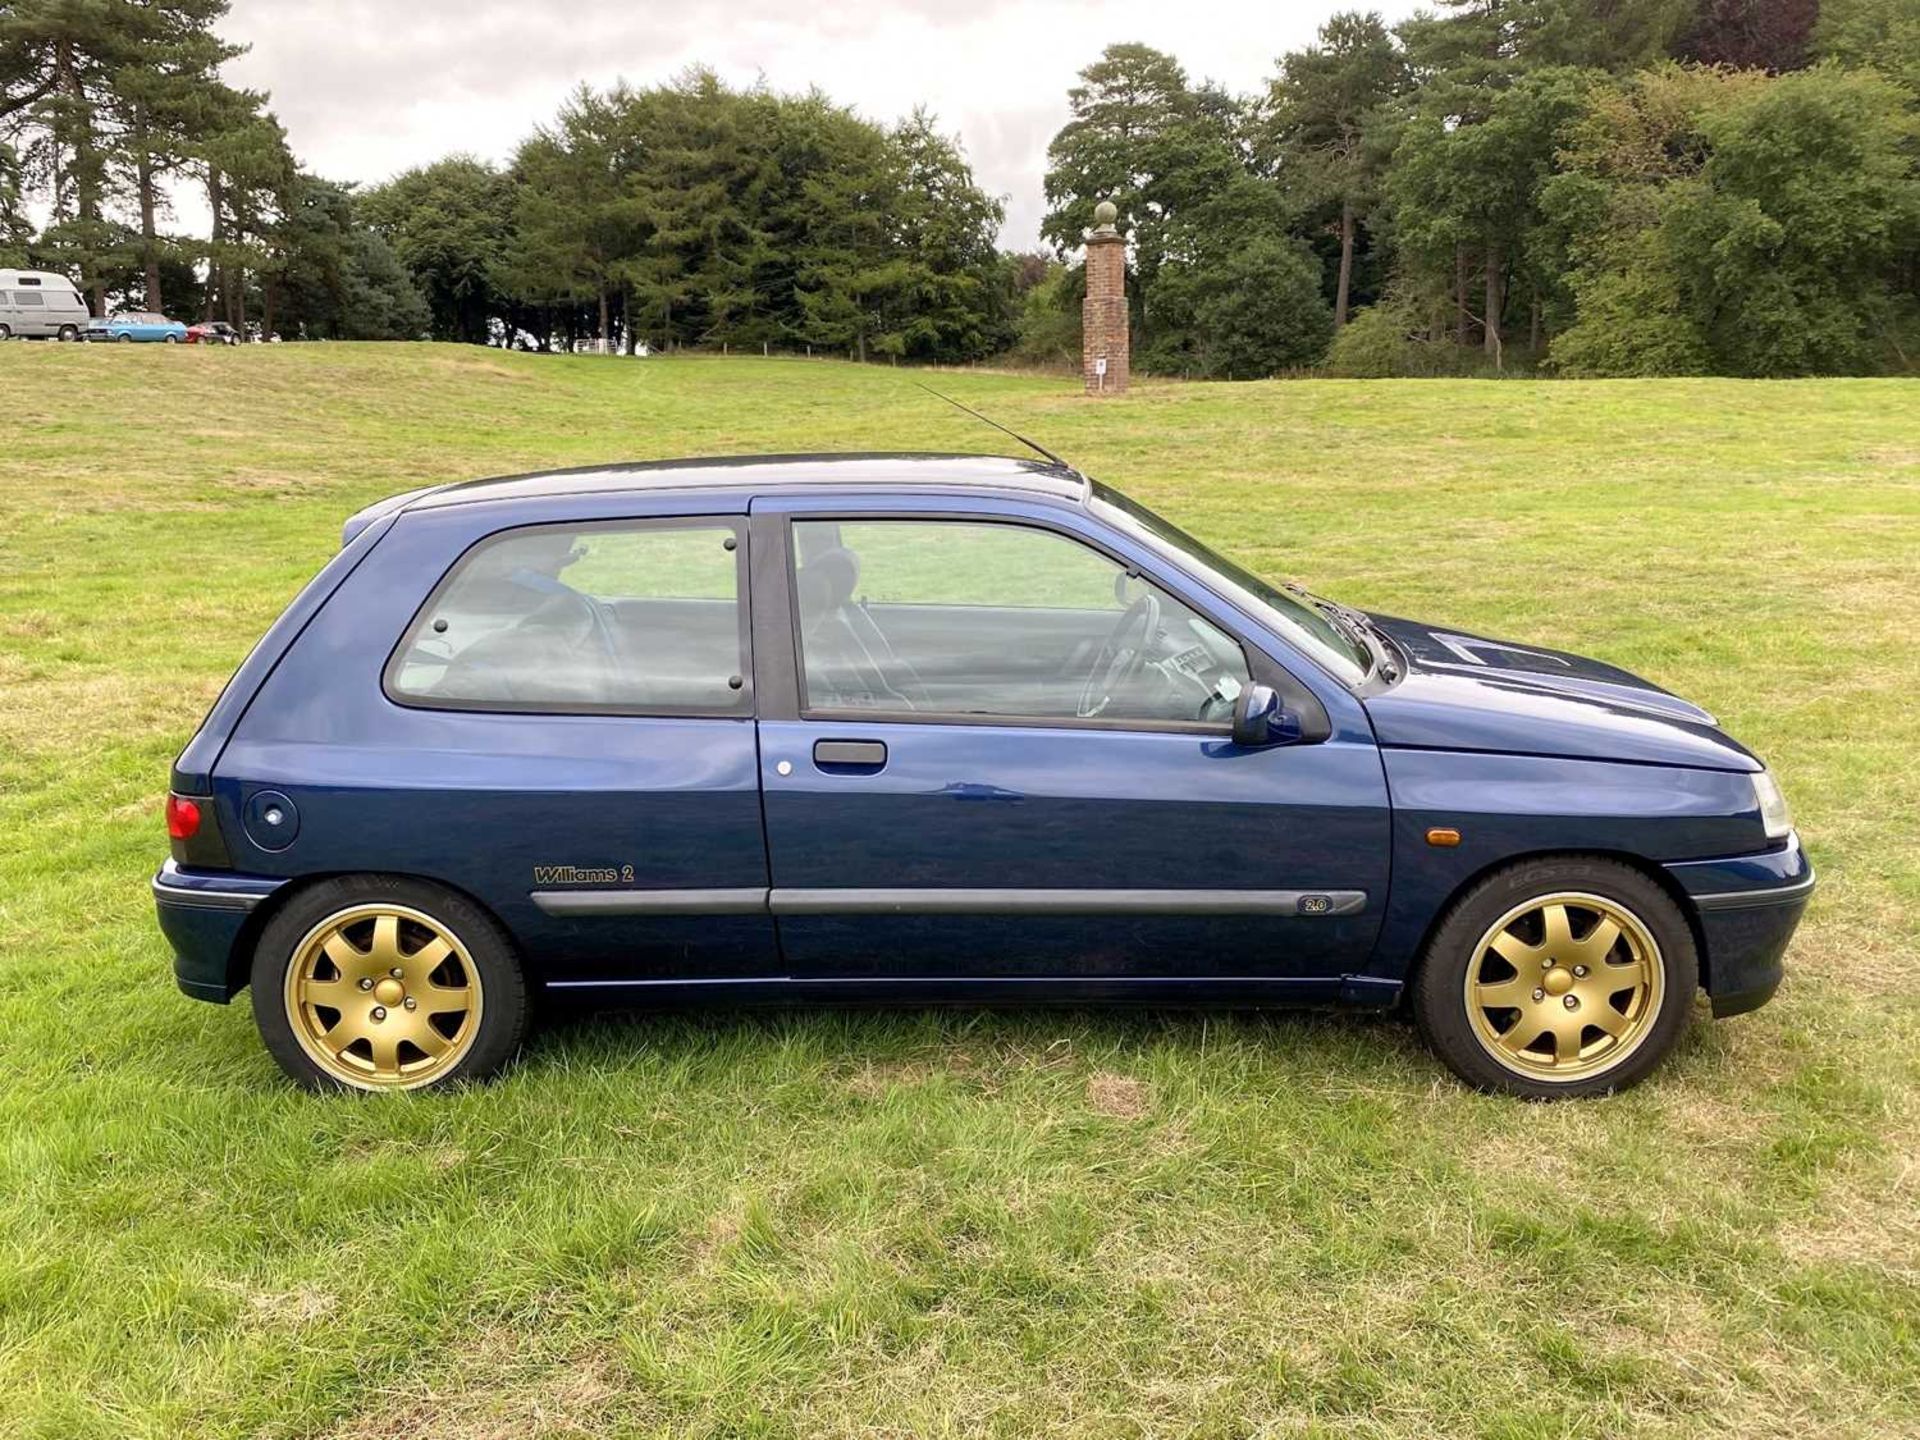 1995 Renault Clio Williams 2 UK-delivered, second series model and said to be one of just 482 produc - Image 7 of 66